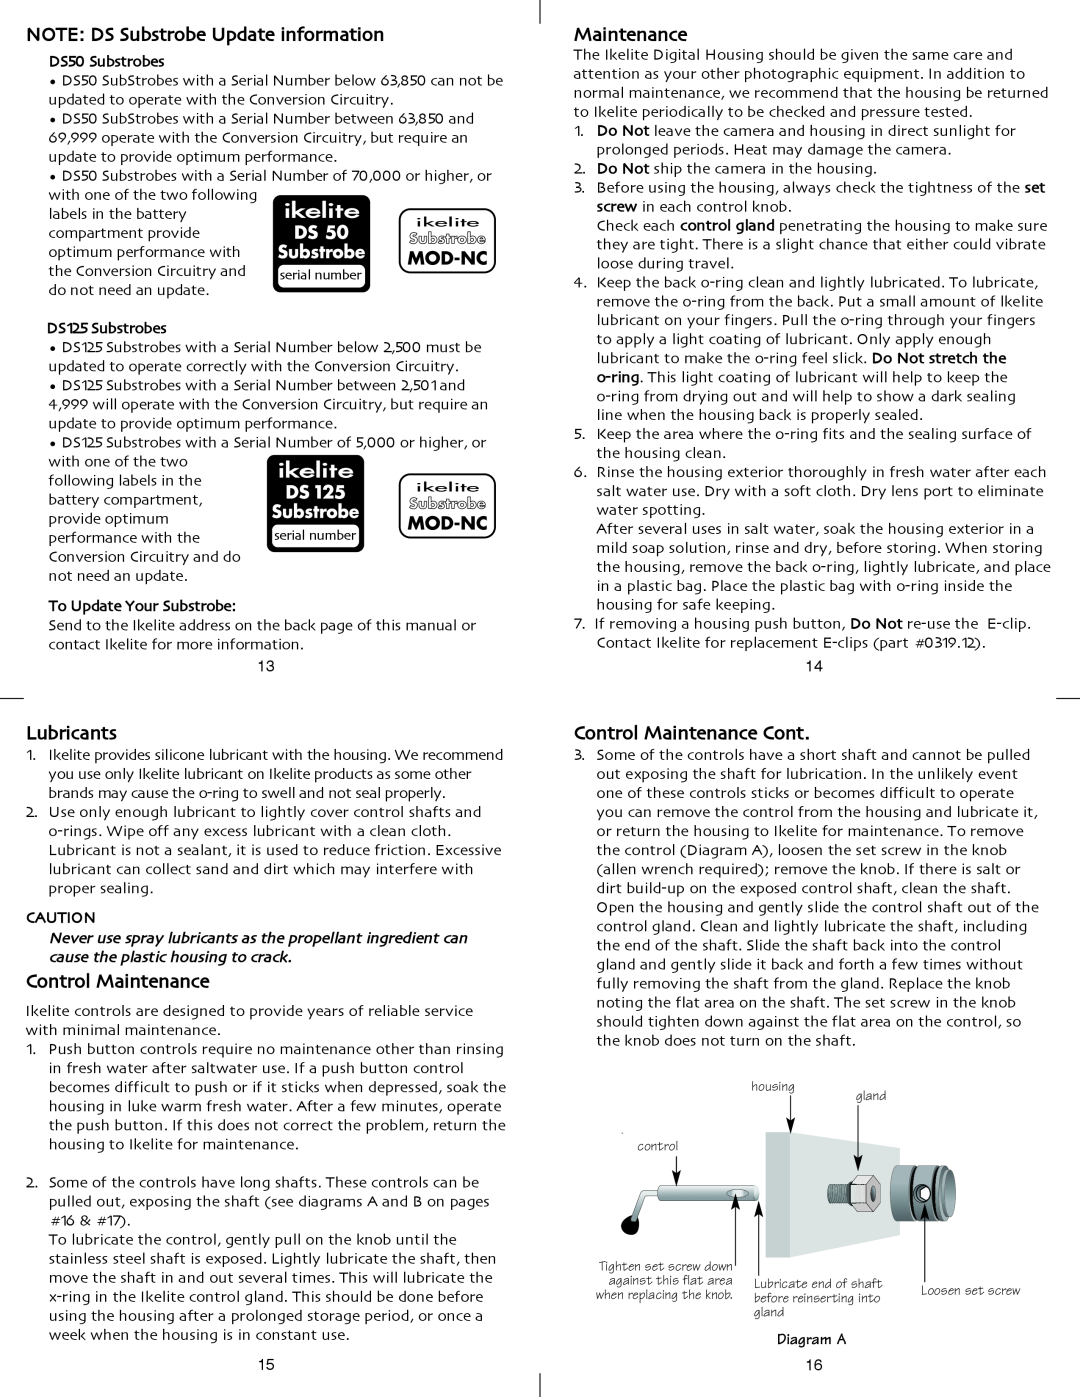 Ikelite G12, G11 NOTE DS Substrobe Update information, Lubricants, Control Maintenance Cont, Mod-Nc 